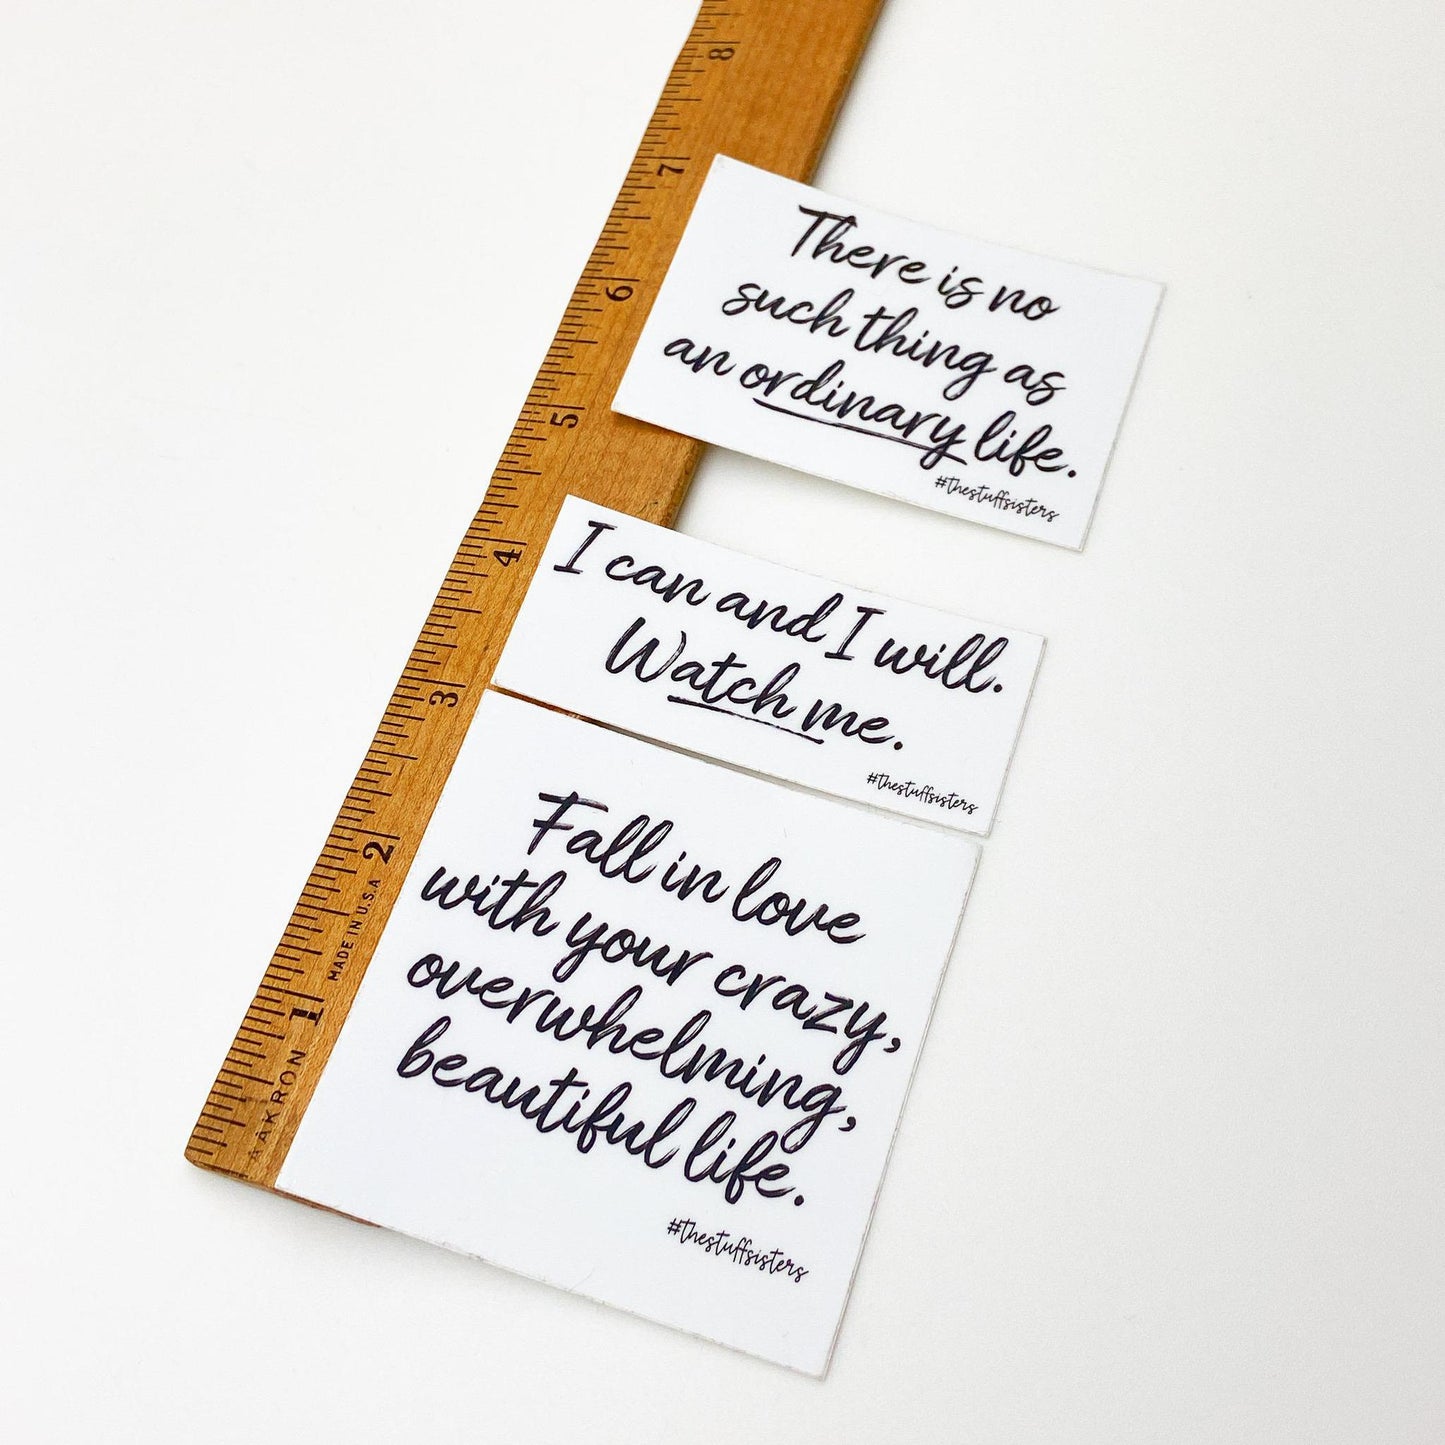 Sticker - "There is No Such Thing as an Ordinary Life..."